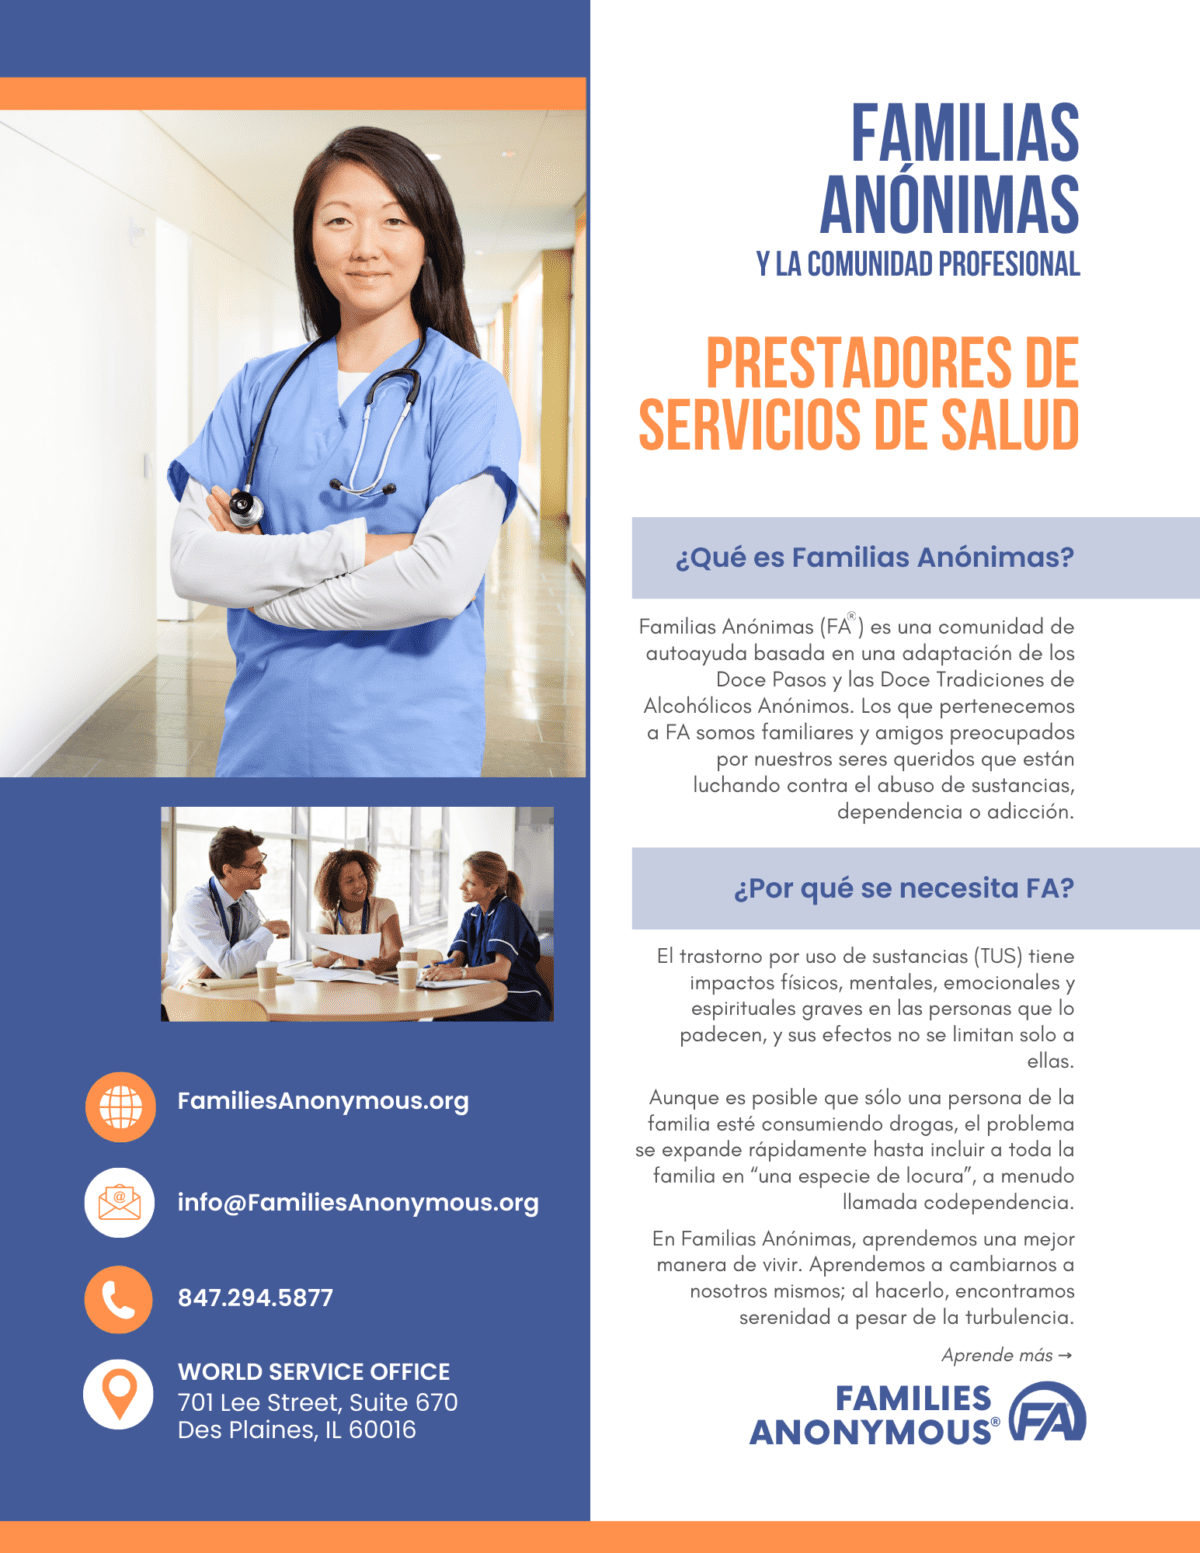 Families Anonymous and the Professional Community – Healthcare – SPANISH